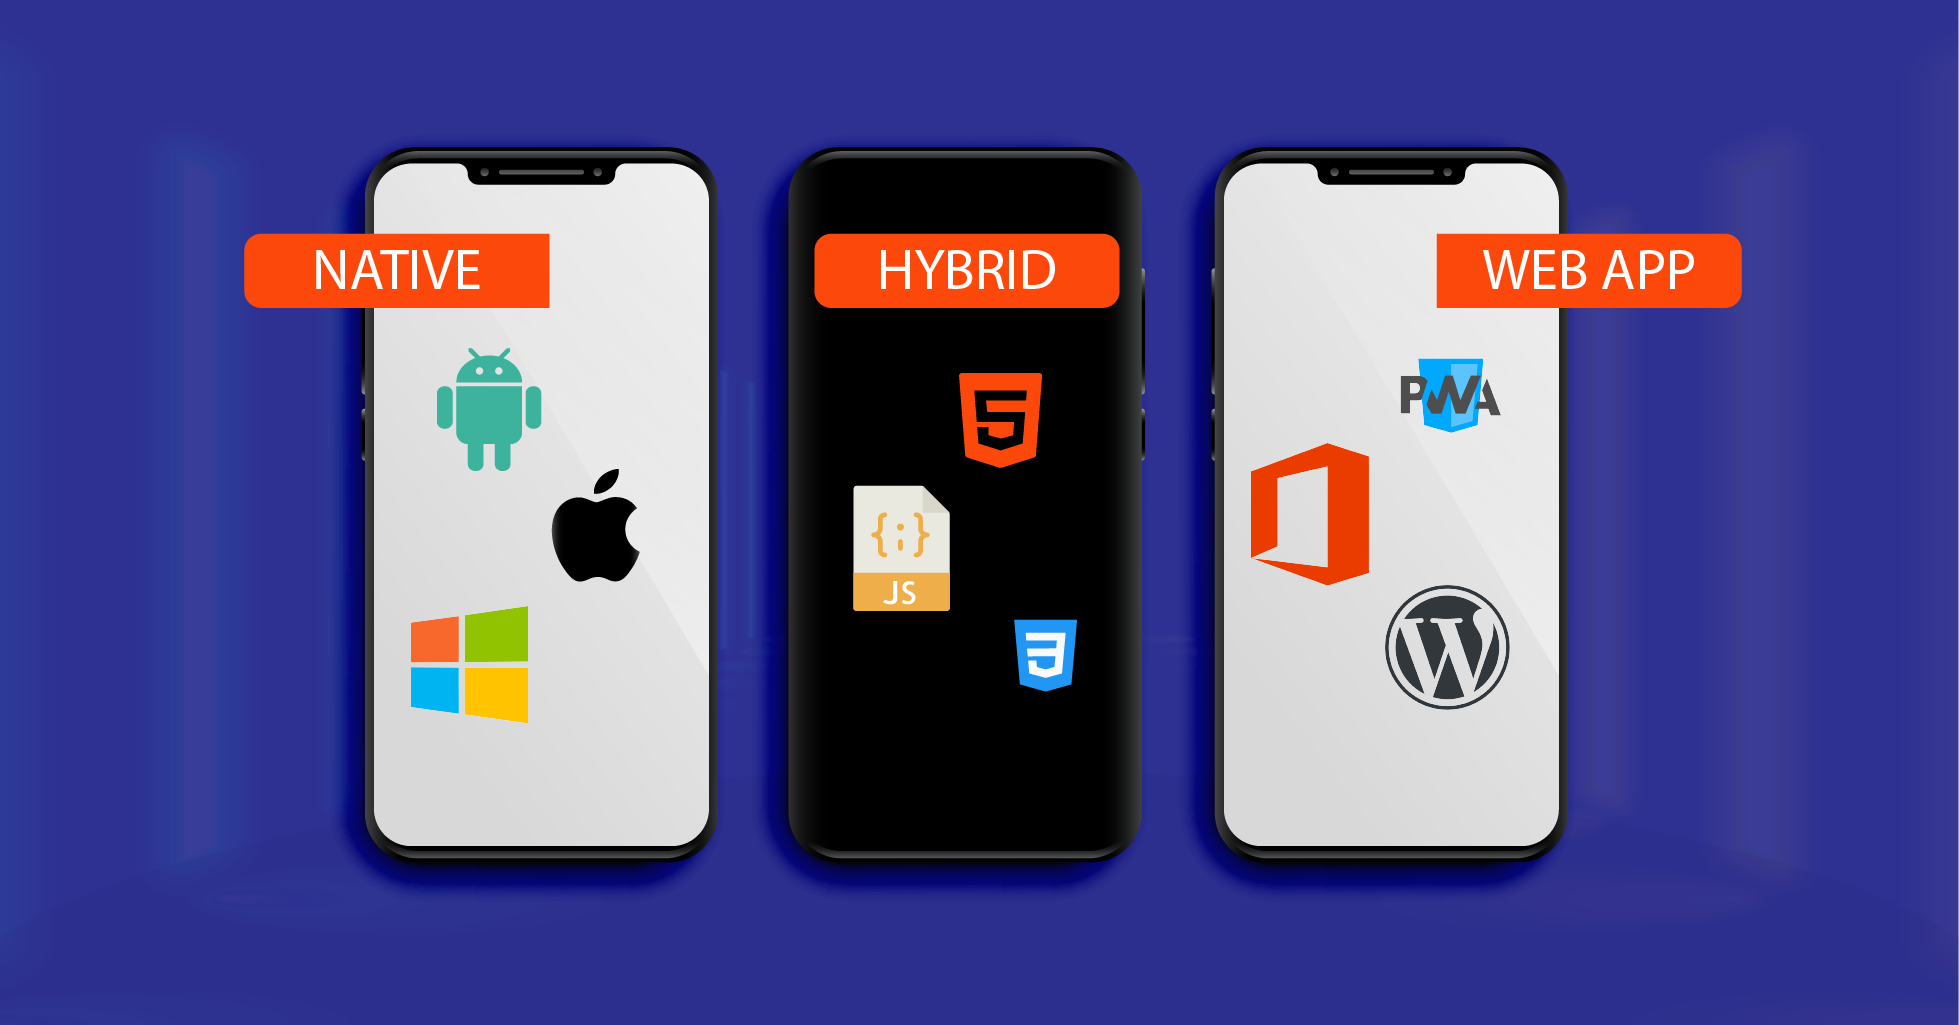 Web, Native and Hybrid Apps - Which Platform Gives Long-Lasting Success?